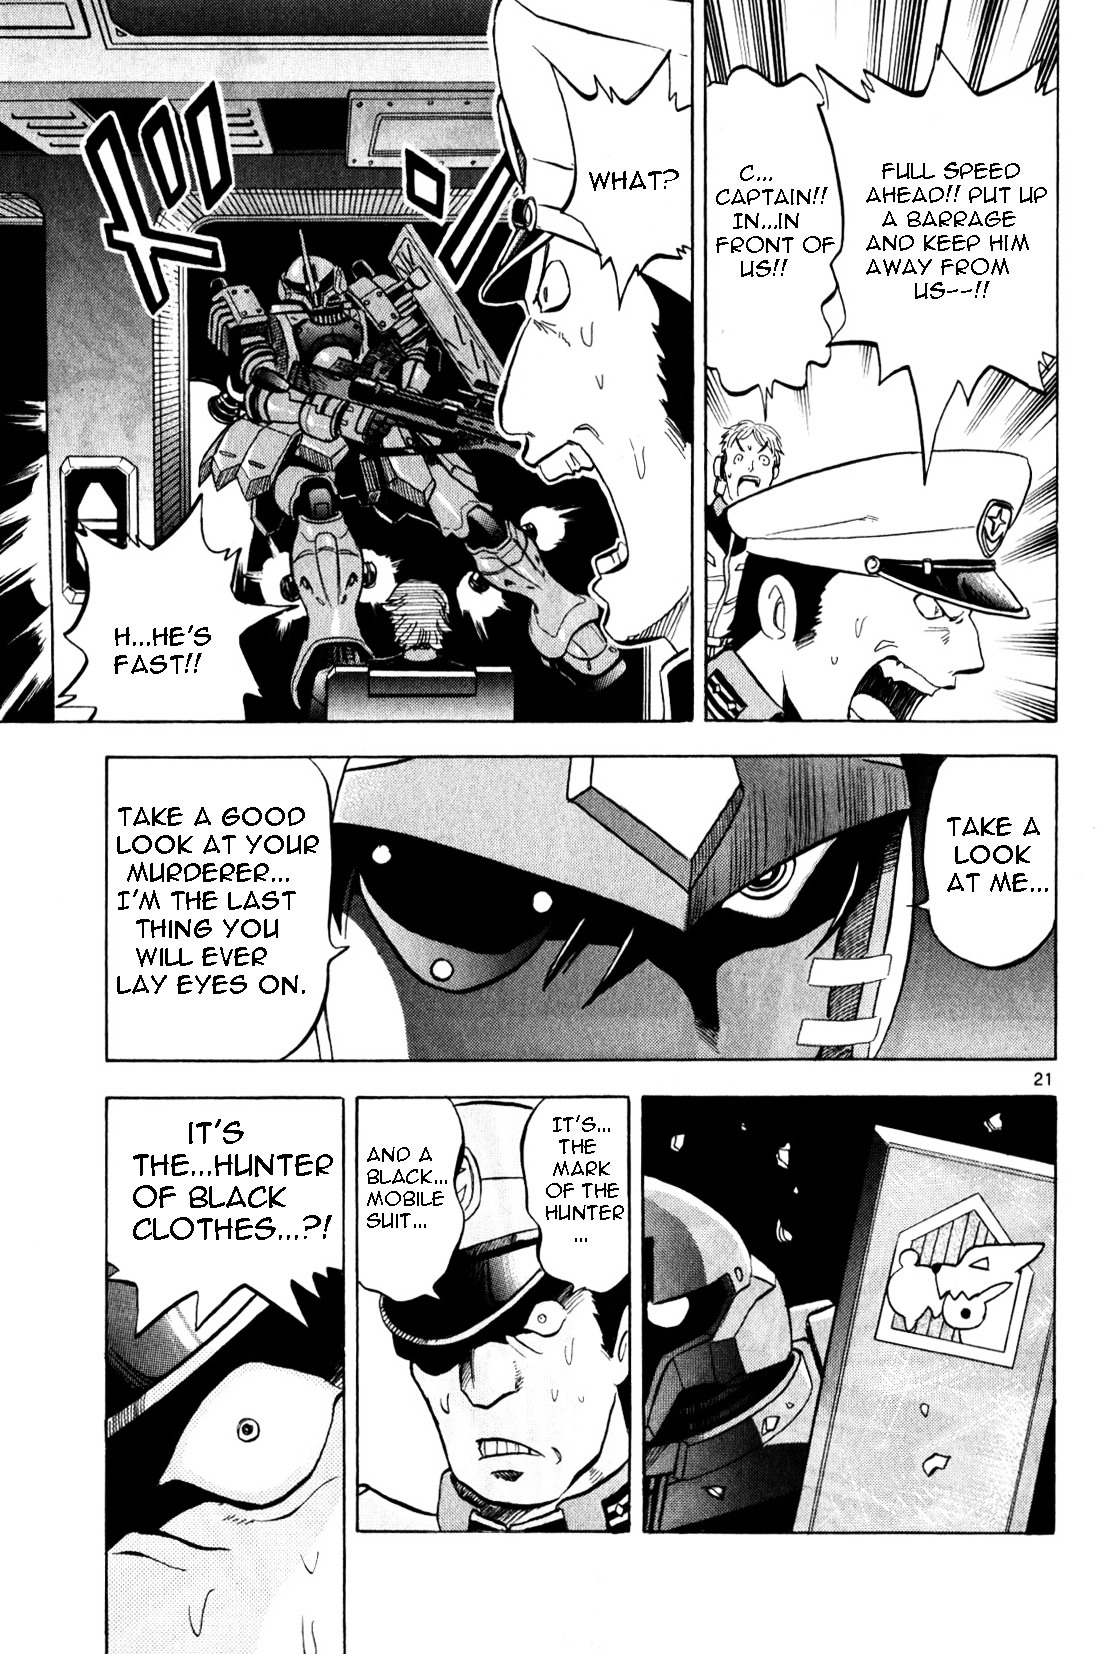 Mobile Suit Gundam: Hunter Of Black Clothes Chapter 0 #62